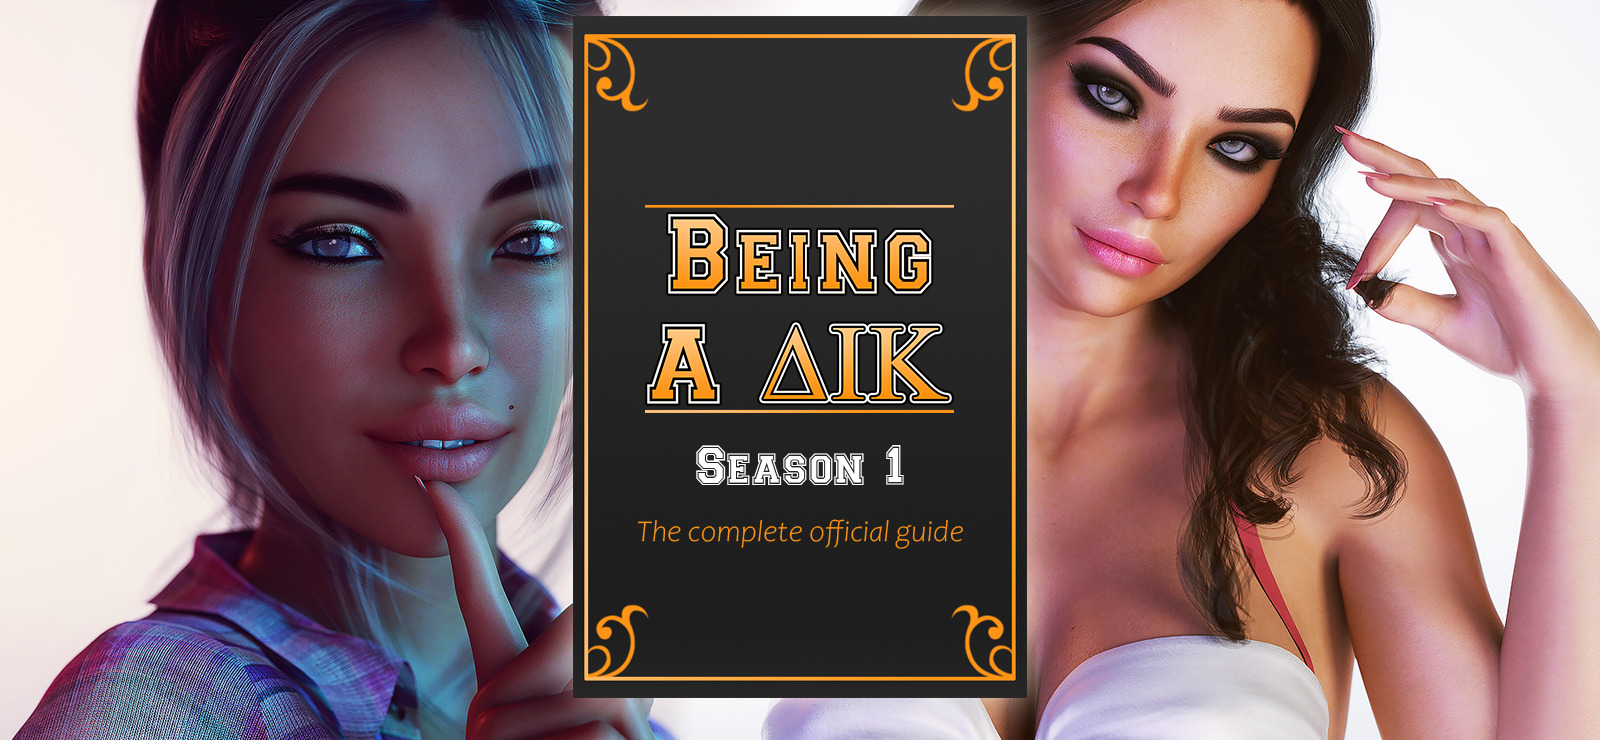 being-a-dik-season-1-the-complete-official-guide-on-gog